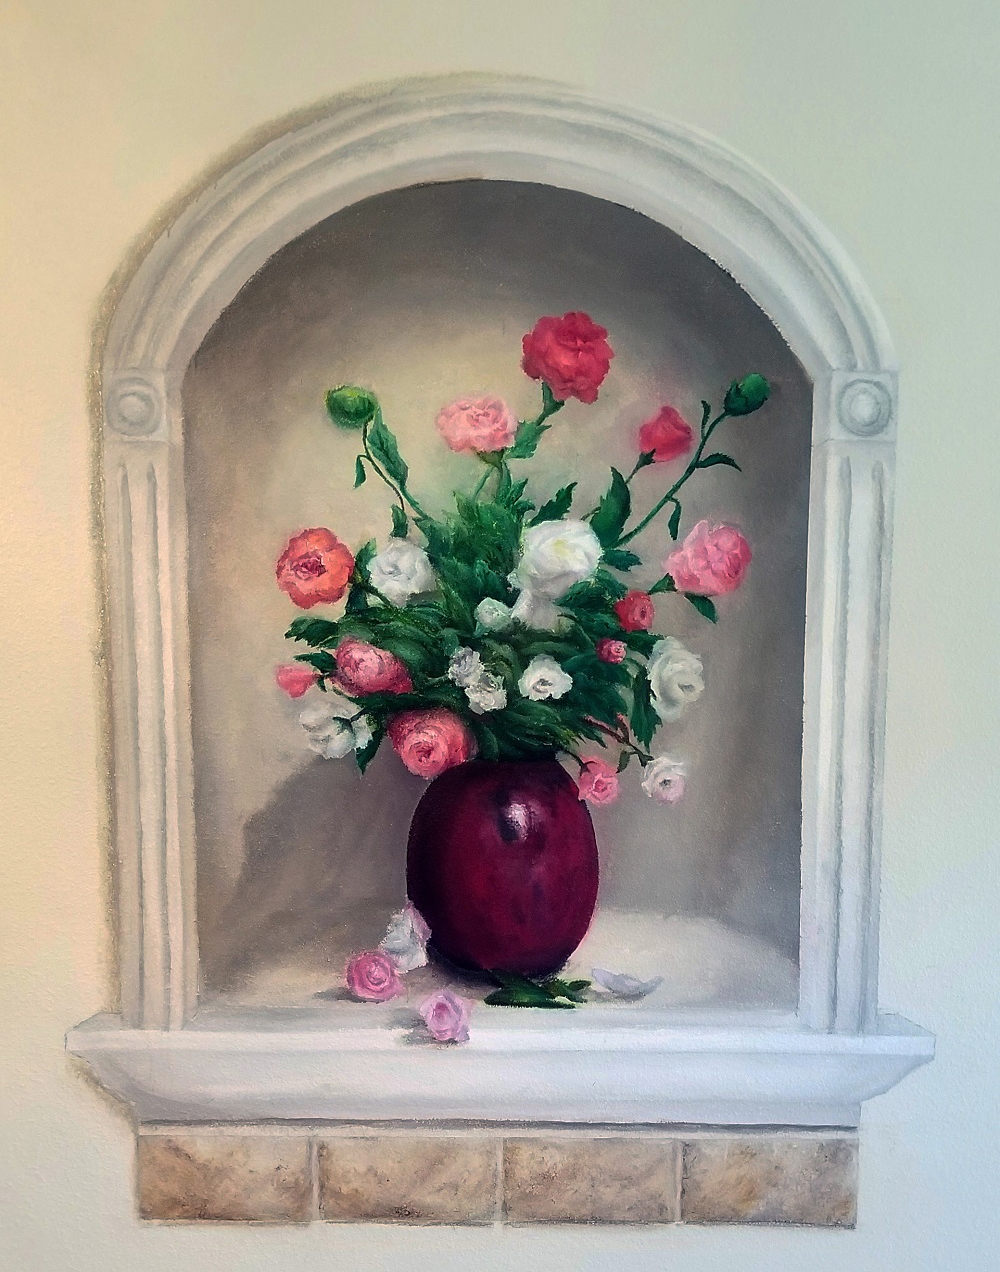 A Flower Vase With White and Pink Color Roses Painting